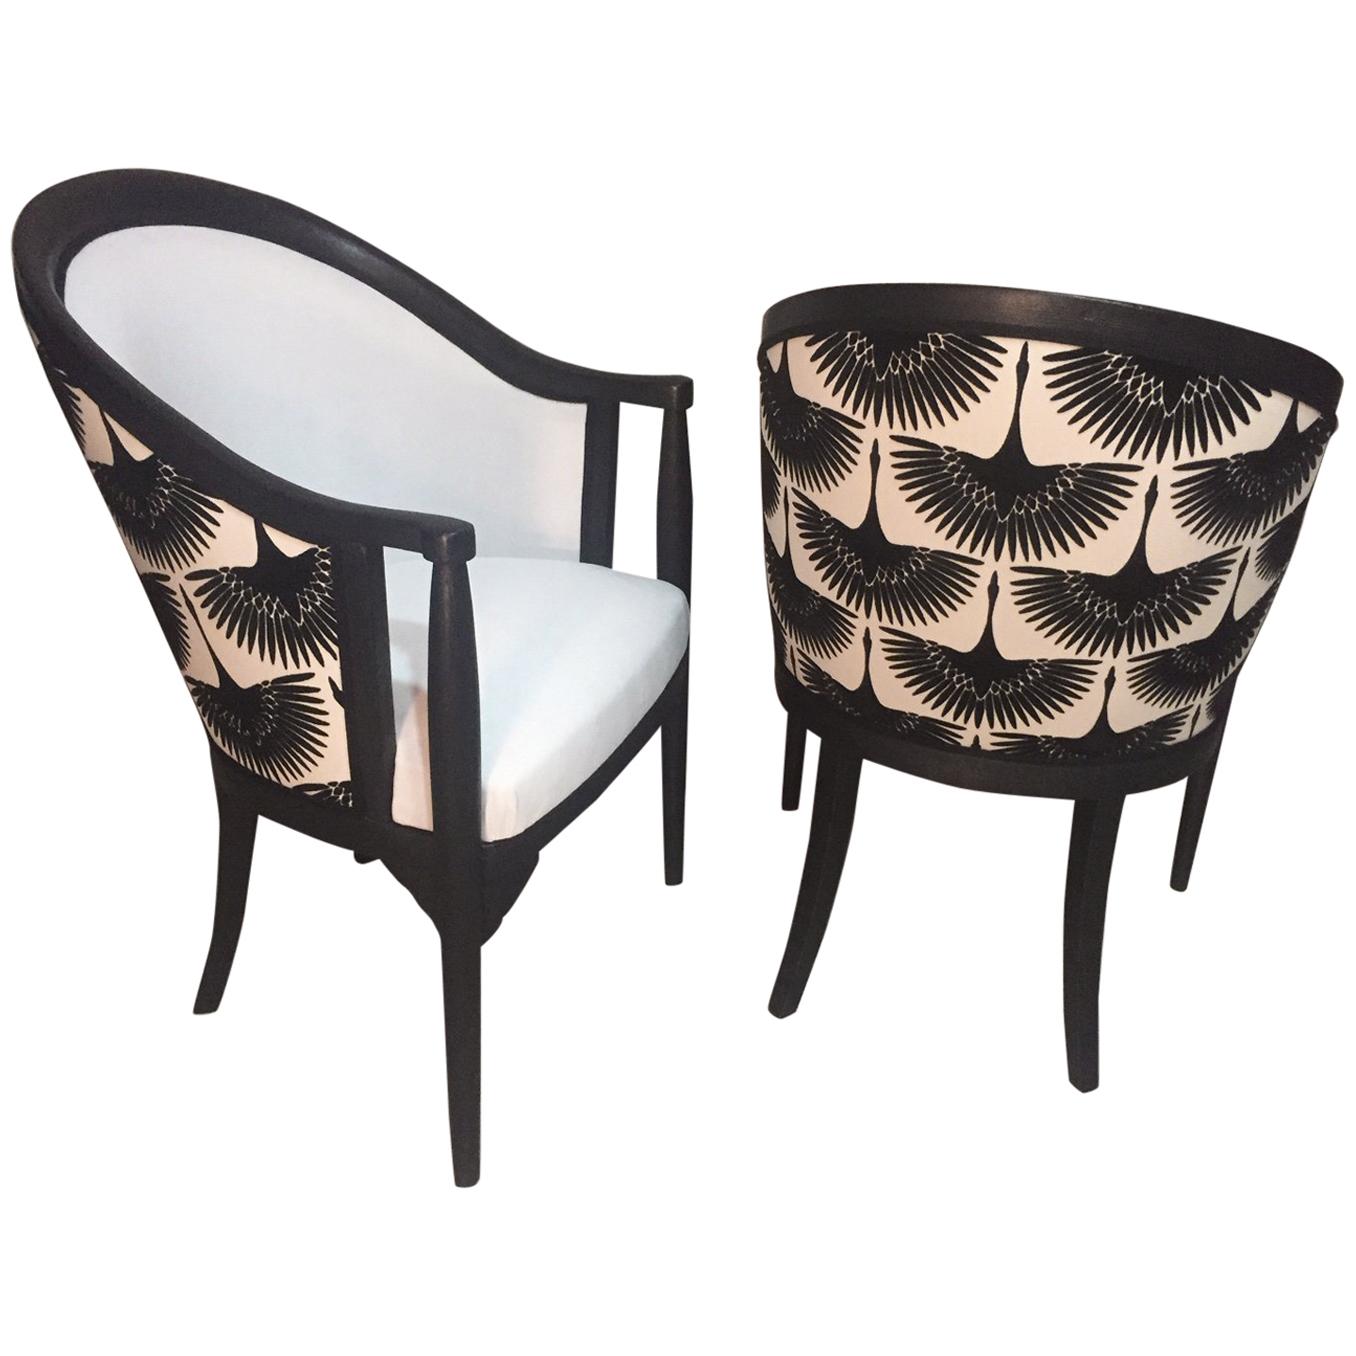 20th Century French Art Deco Upholstered Armchair Pair, 1930s